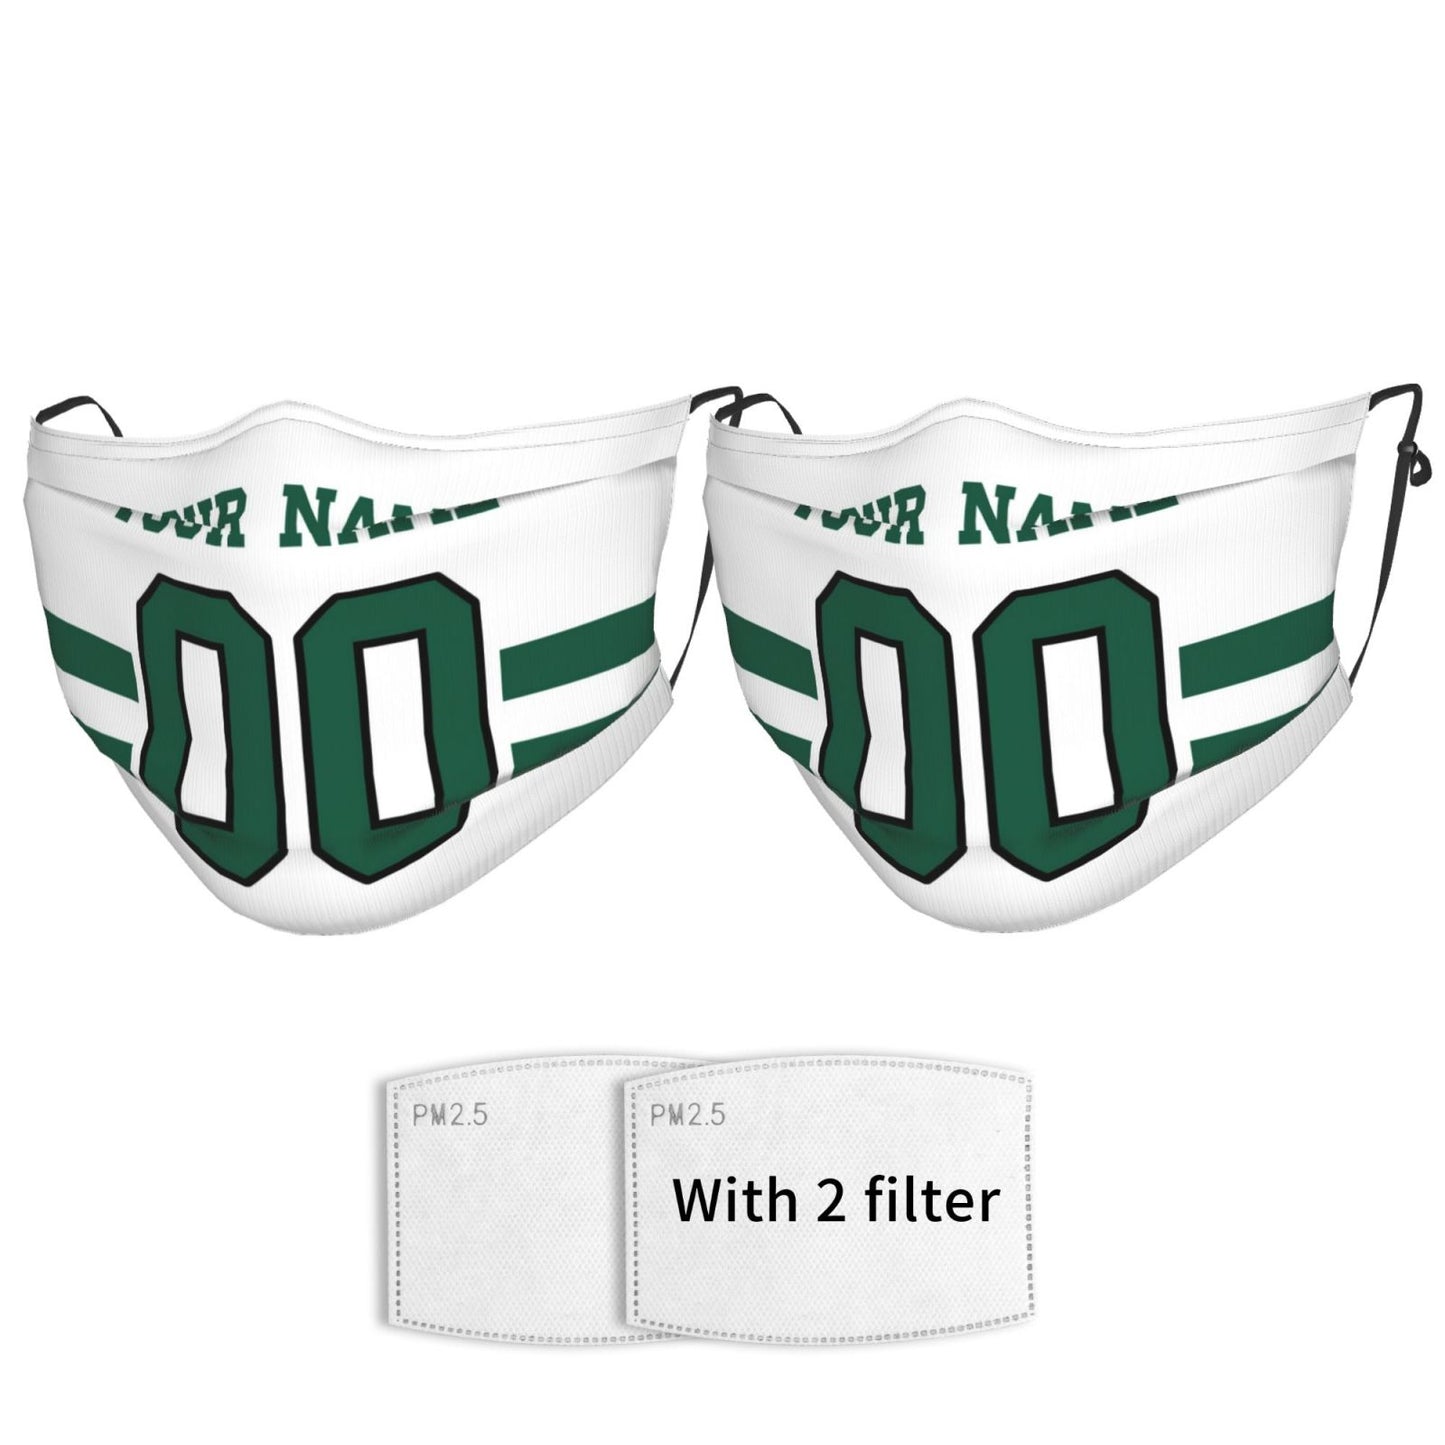 2-Pack New York Jets Face Covering Football Team Decorative Adult Face Mask With Filters PM 2.5 White